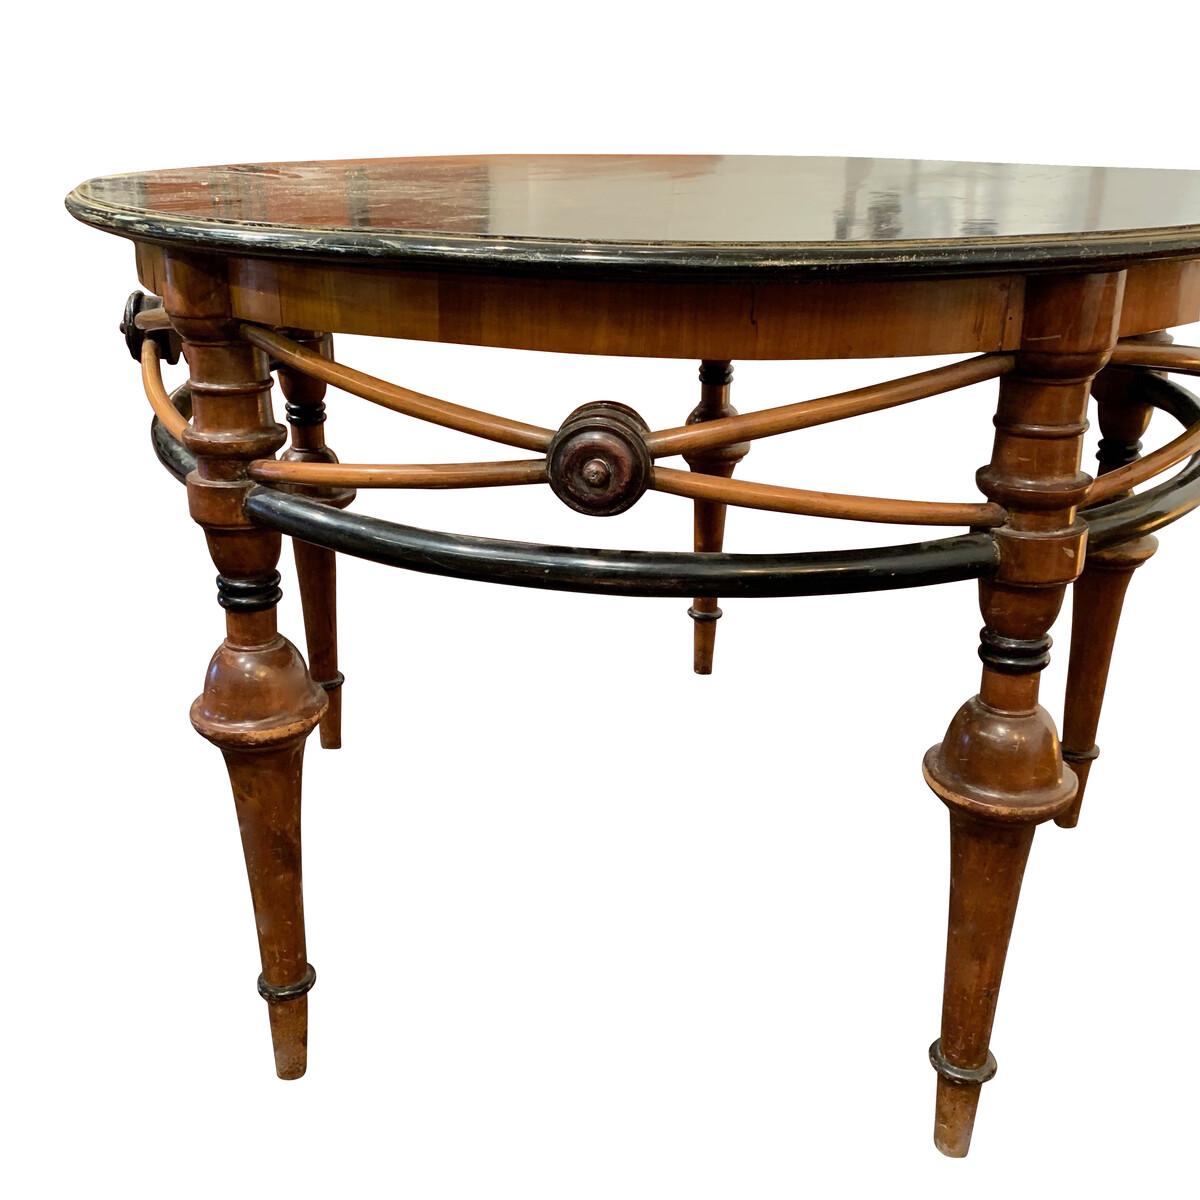 Late 19th century French Belle Époque round center hall table
Decorative criss cross wood details around the apron of the table
Contrasting brown and black typifies this style of furniture during this period
Bottom of the table recently